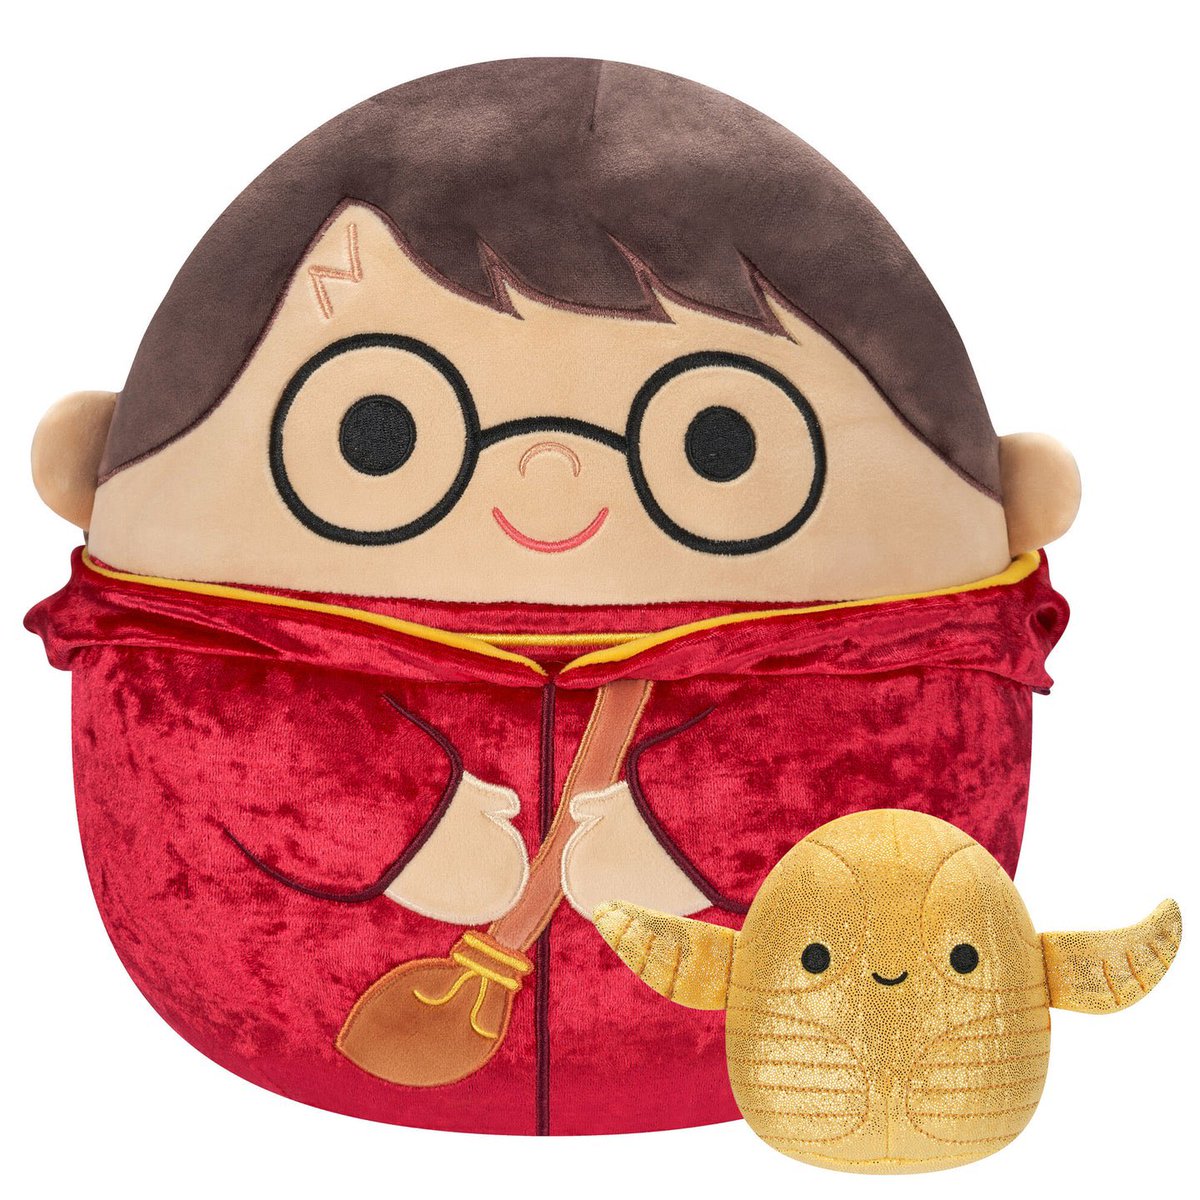 Available Now: Jazwares exclusive Quidditch Harry & Golden Snitch Squishmallows! Use code MOBILE10 for 10% off.
.
shop.jazwares.com/products/harry…
.
#HarryPotter #Squishmallow #Squishmallows #Quidditch #Hogwarts #WizardingWorld #Plush #Collectibles #DisTrackers